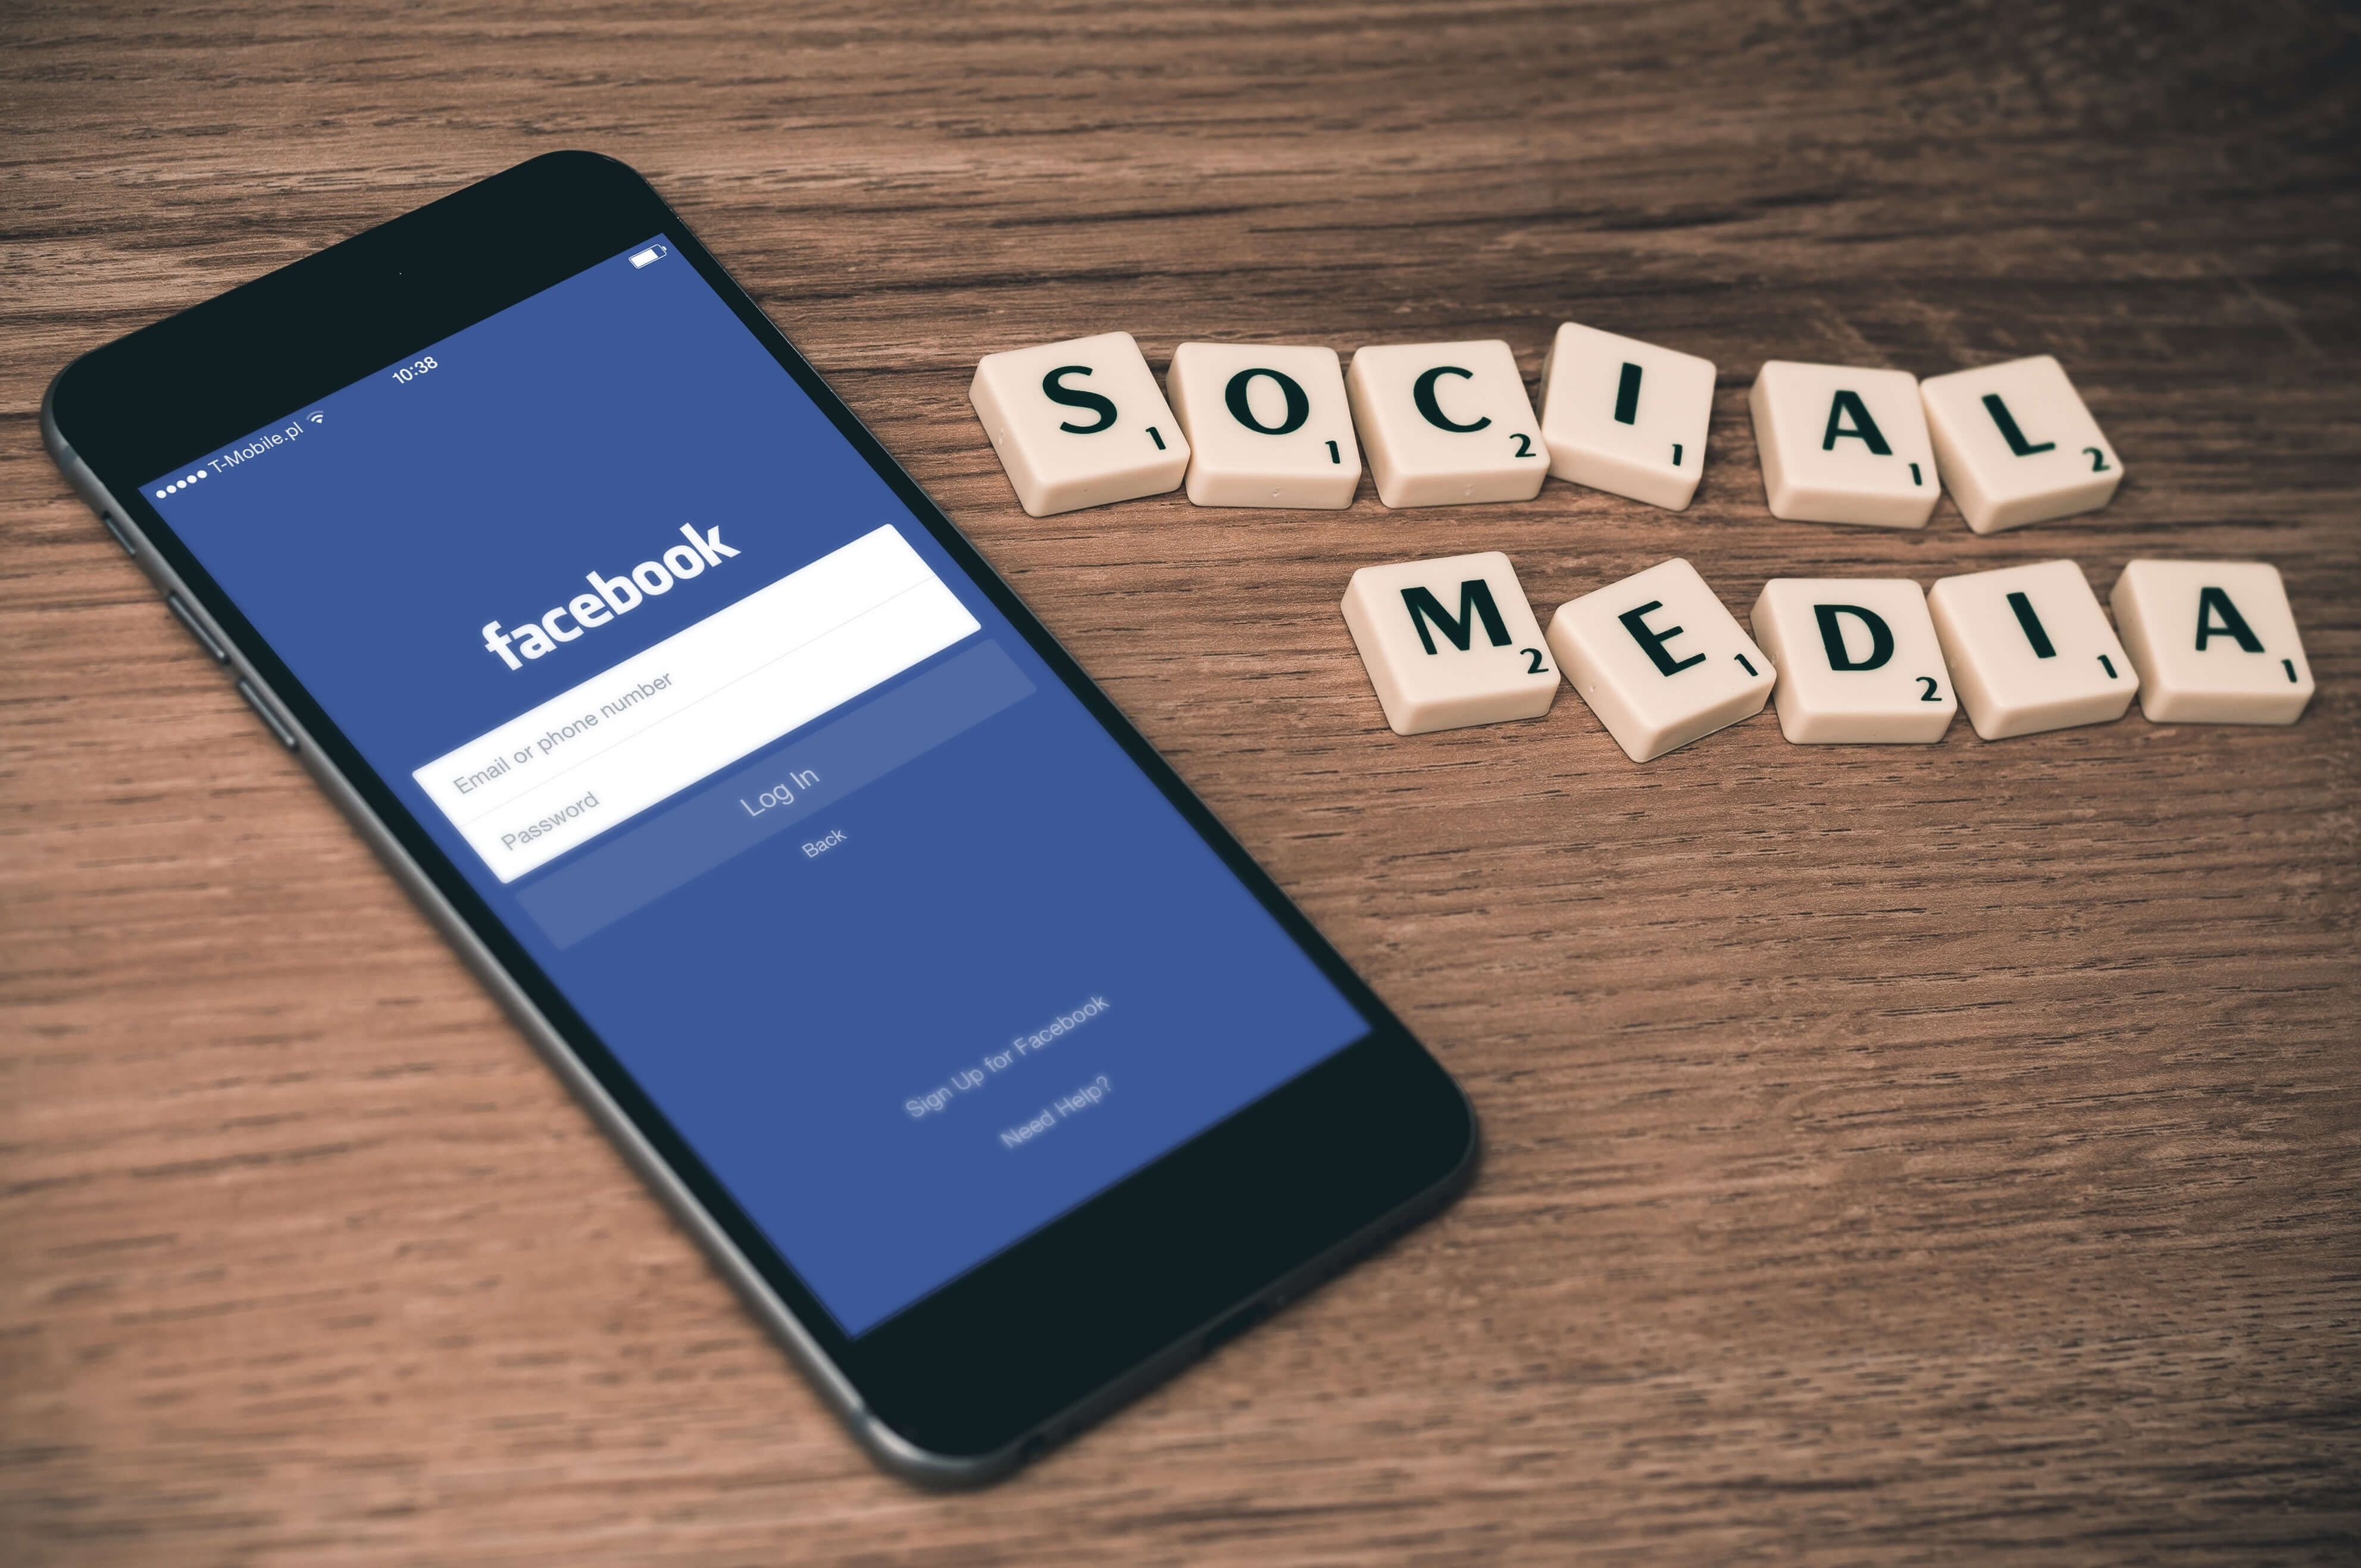 The image shows a smartphone with the Facebook login page open and the text 'Social Media' made up of Scrabble letters next to it on a wooden table - Facebook ads: A step-by-step guide for beginners - Image